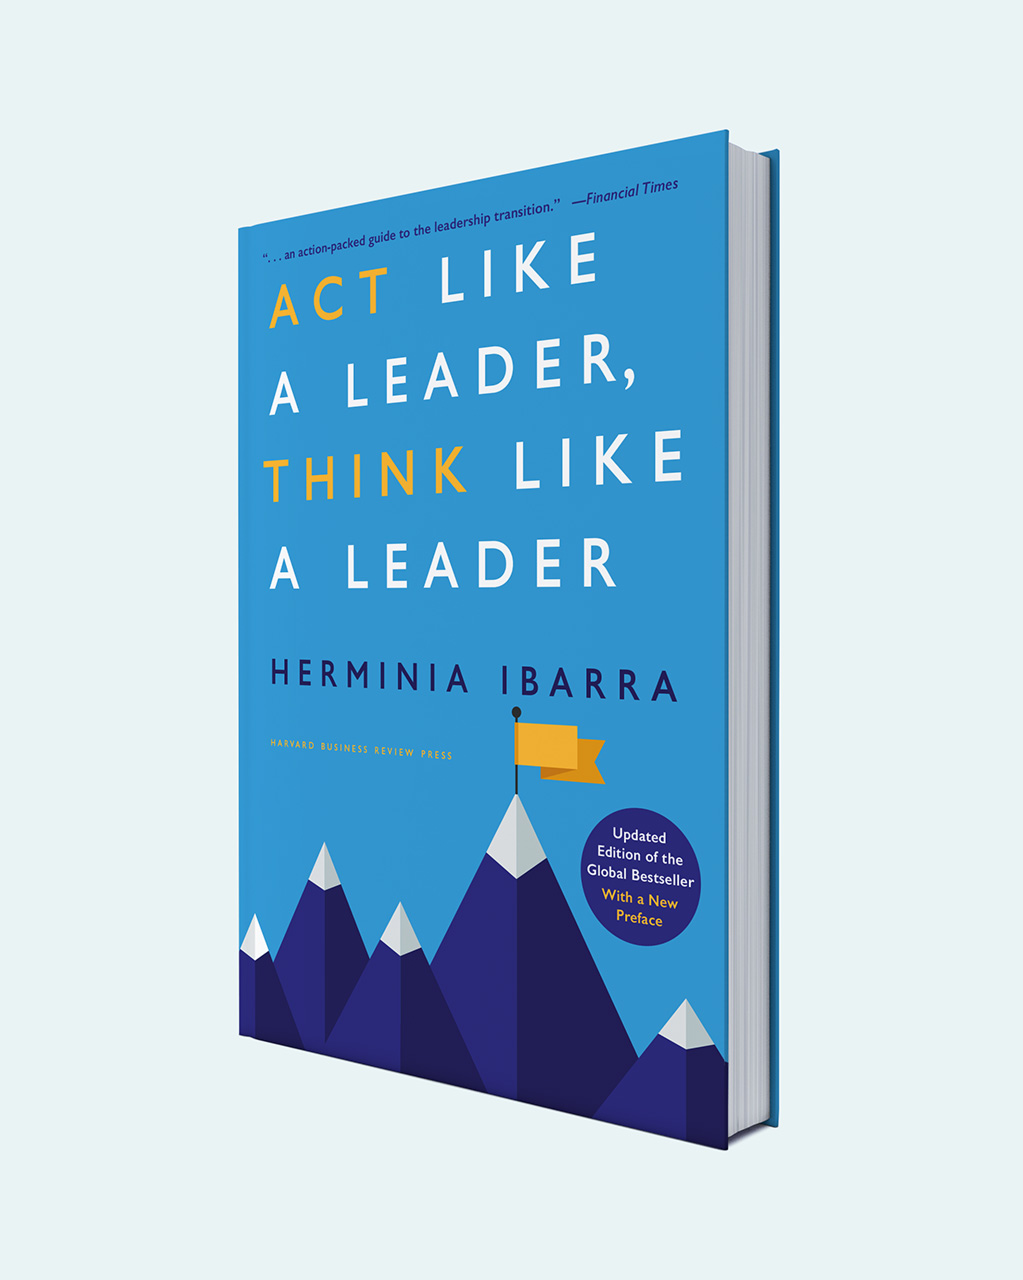 Act Like a Leader, Think Like a Leader book by Herminia Ibarra